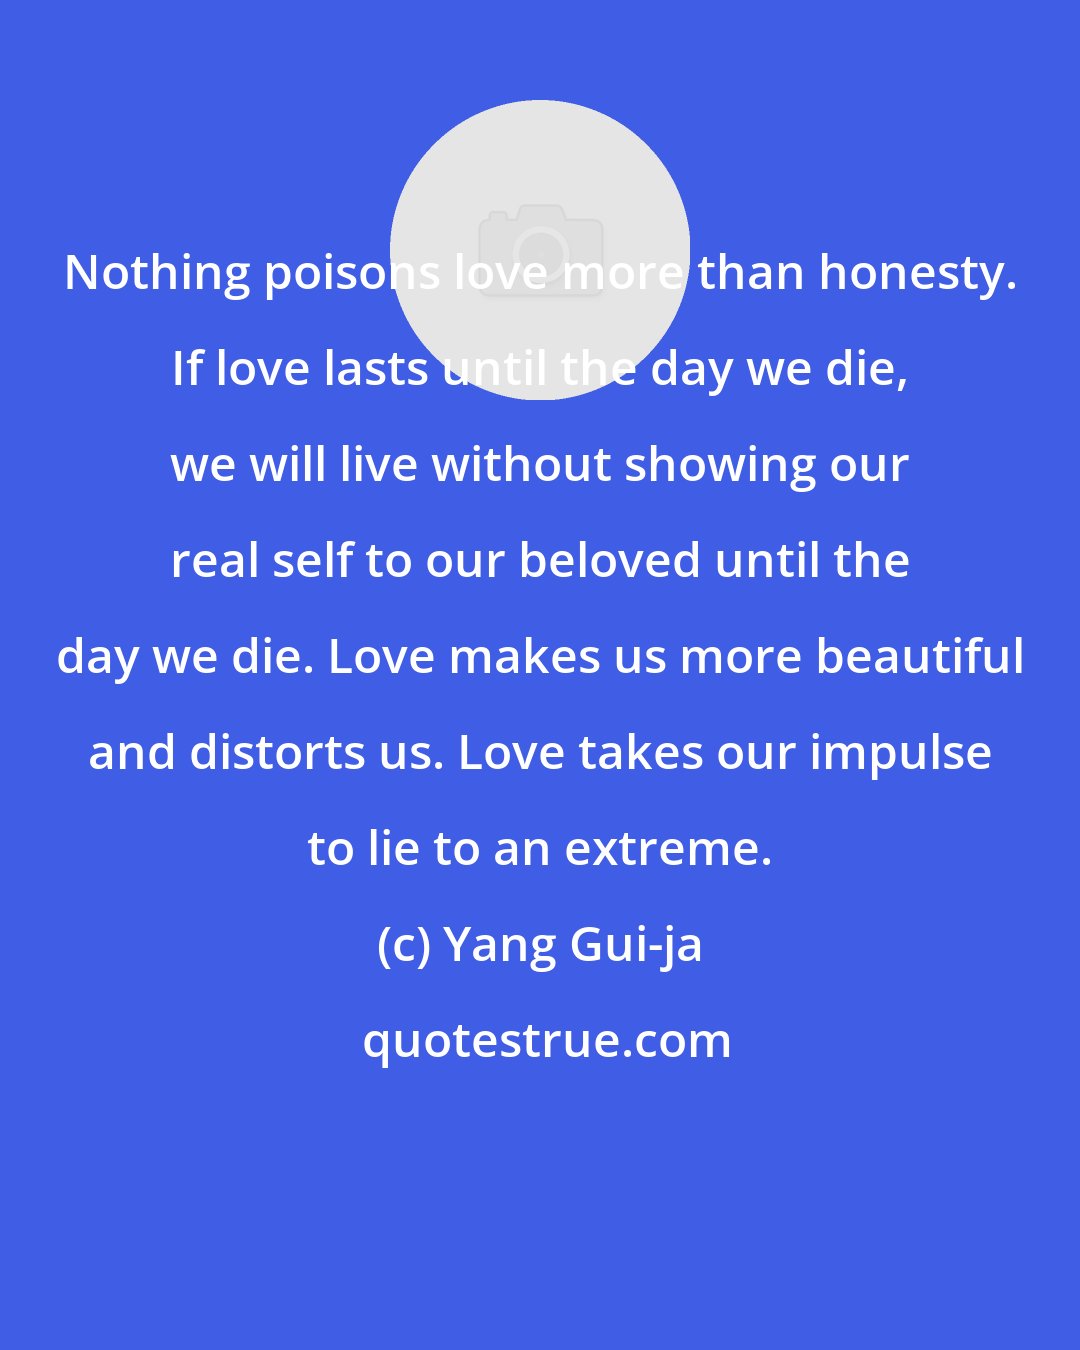 Yang Gui-ja: Nothing poisons love more than honesty. If love lasts until the day we die, we will live without showing our real self to our beloved until the day we die. Love makes us more beautiful and distorts us. Love takes our impulse to lie to an extreme.